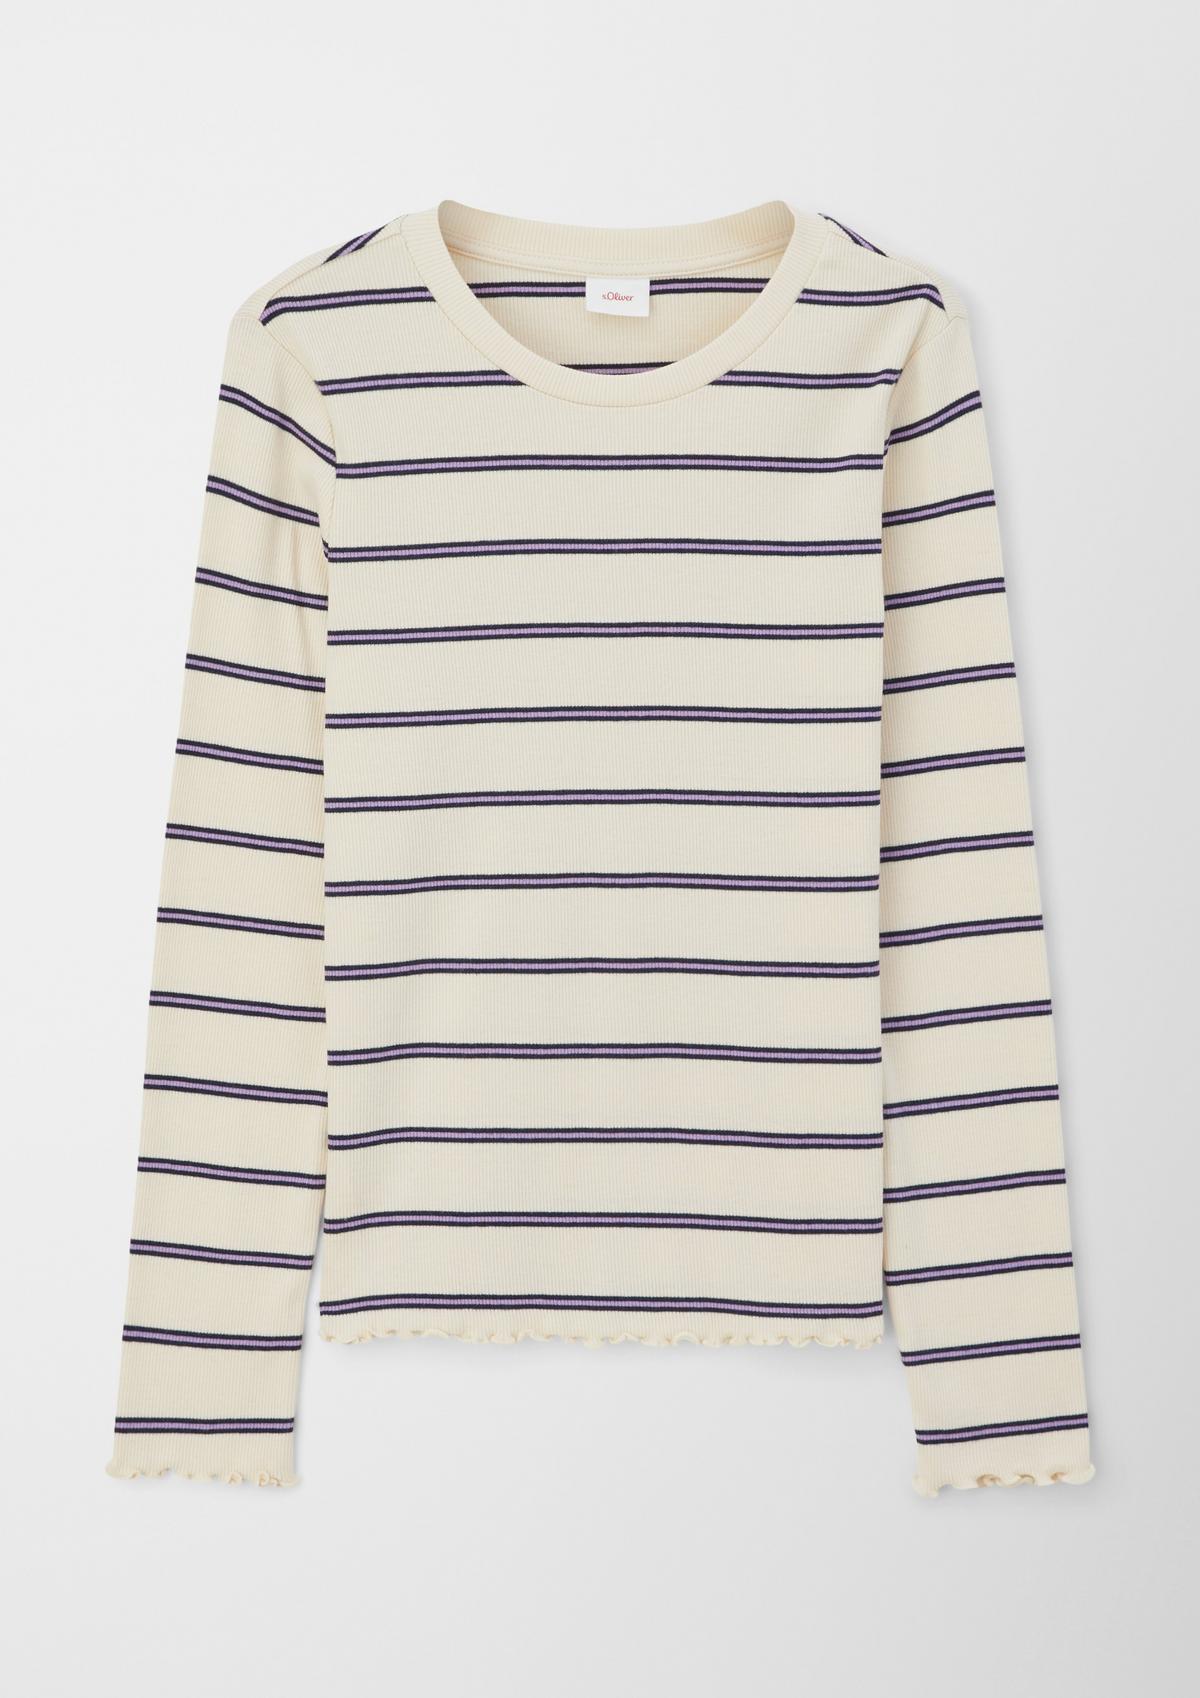 s.Oliver Long sleeve top with horizontal stripes